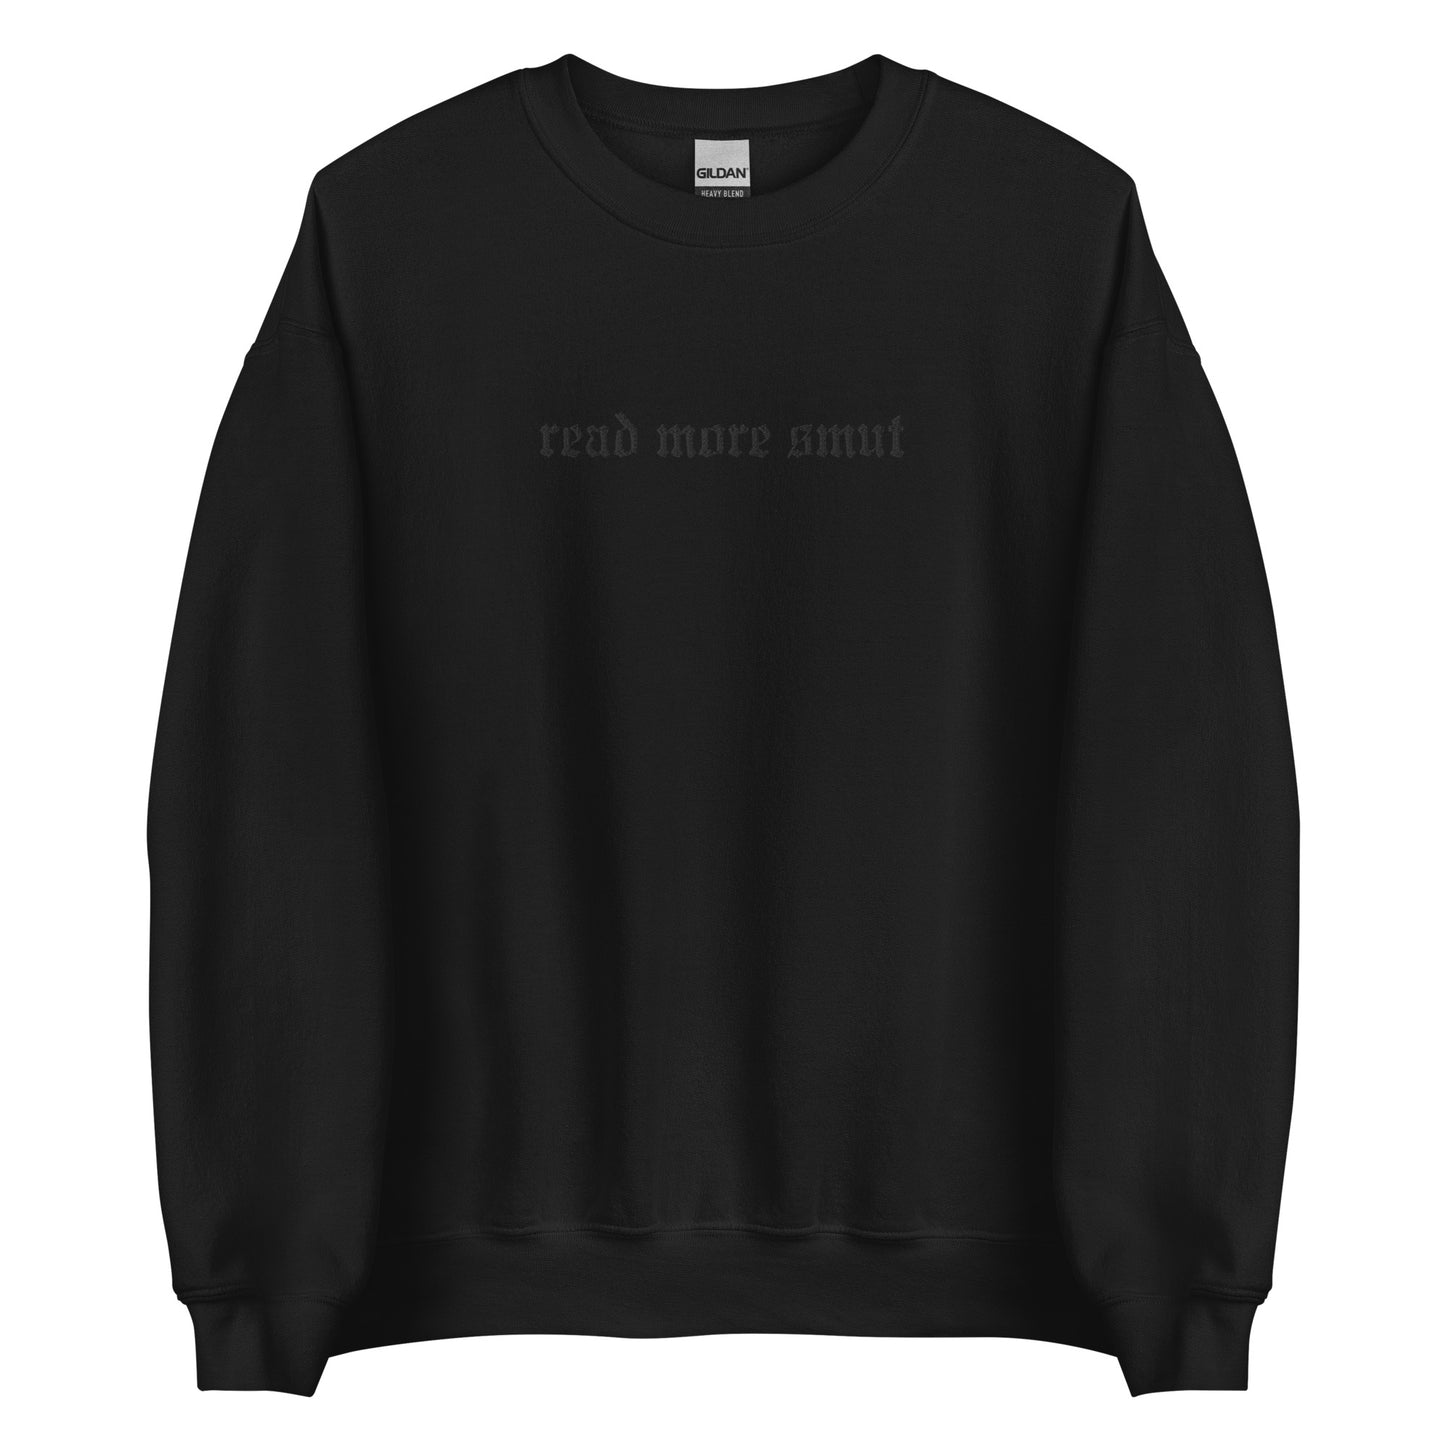 read more smut embroidered sweatshirt